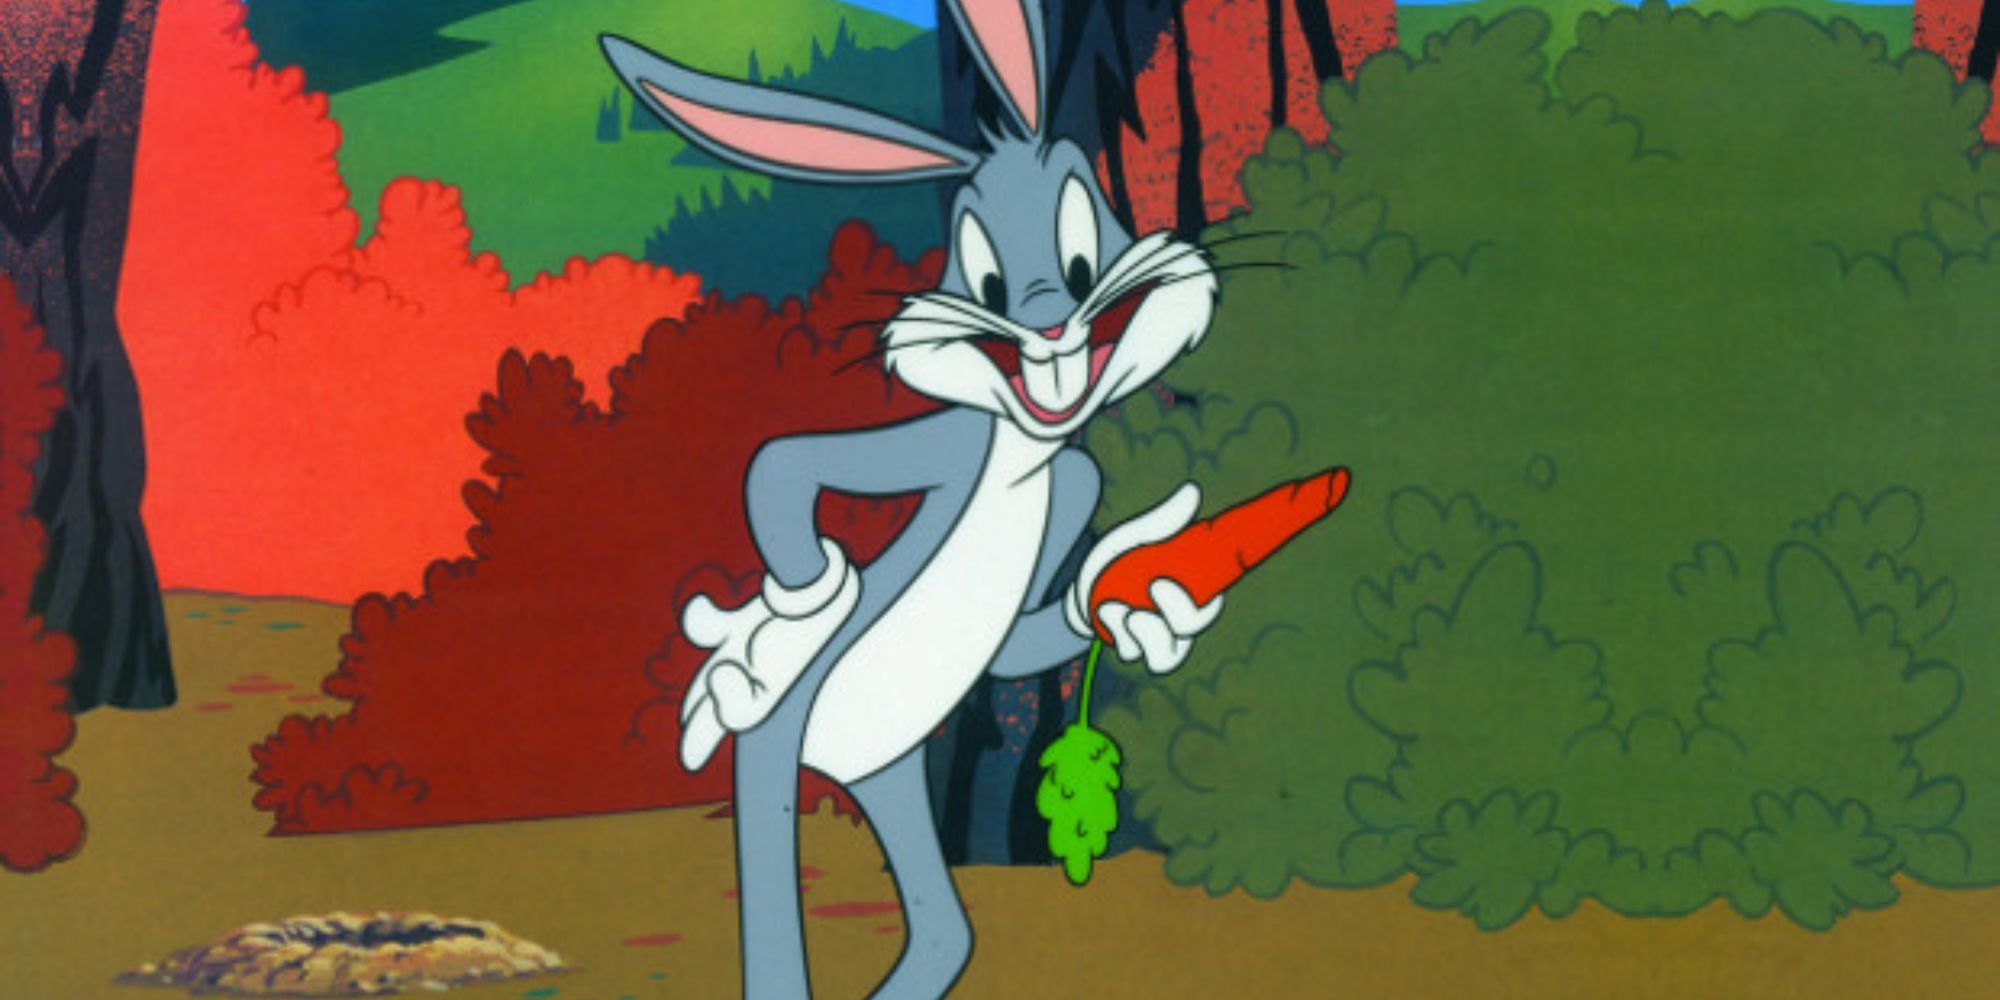 Bugs Bunny poses with a carrot